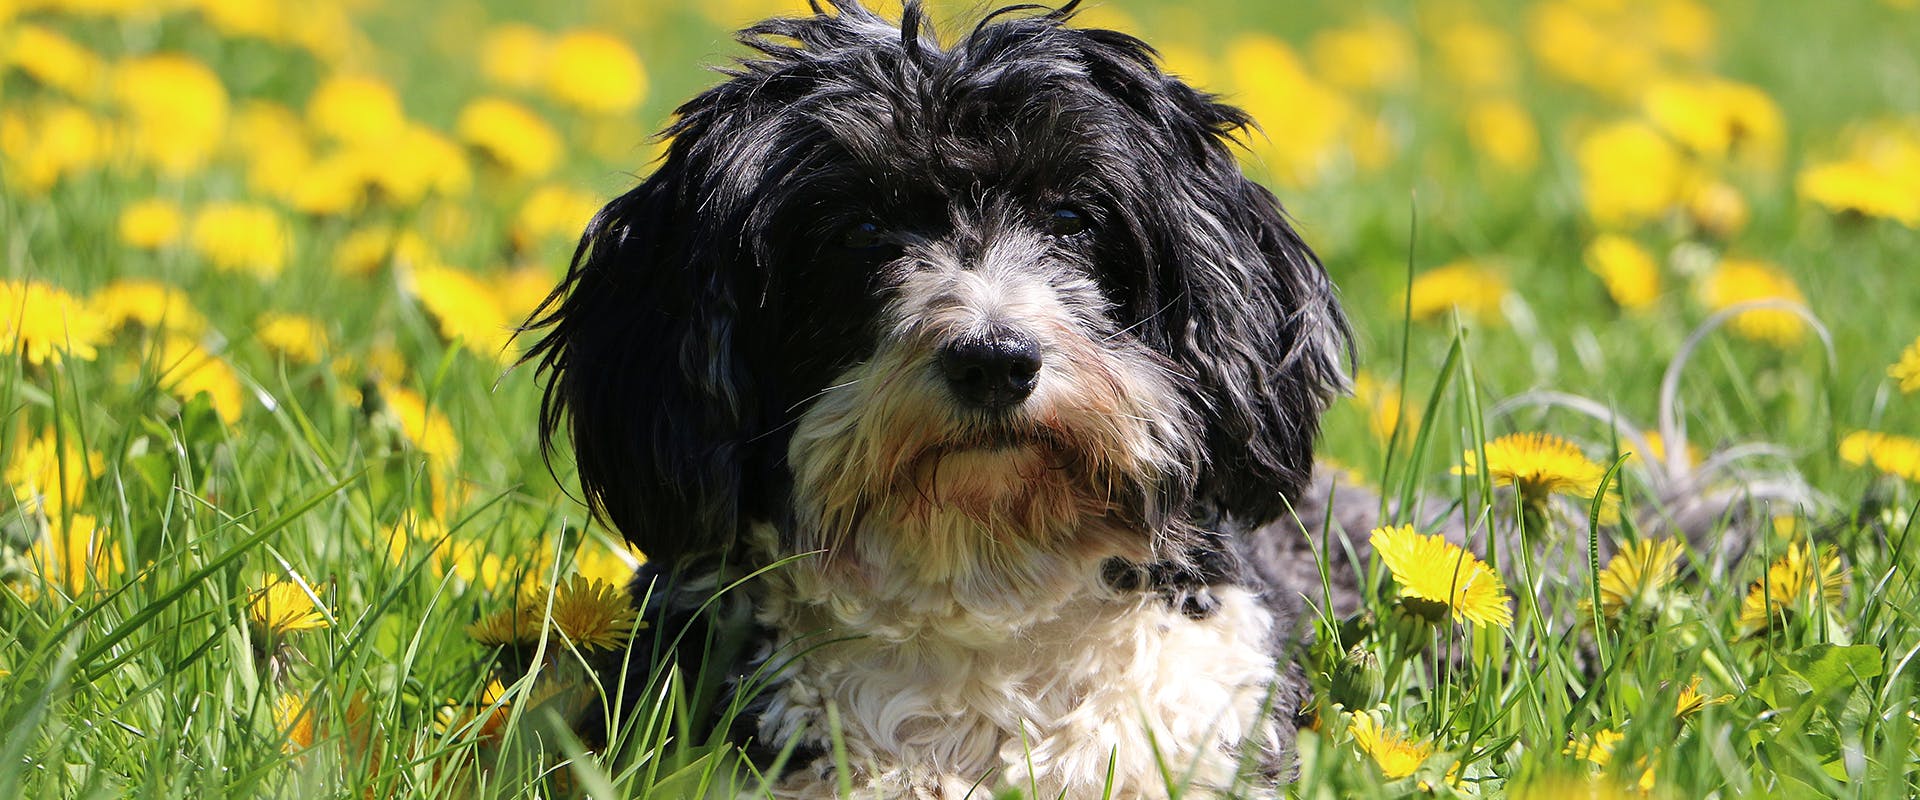 A black and white Havanese dog sitting in a field of flowers